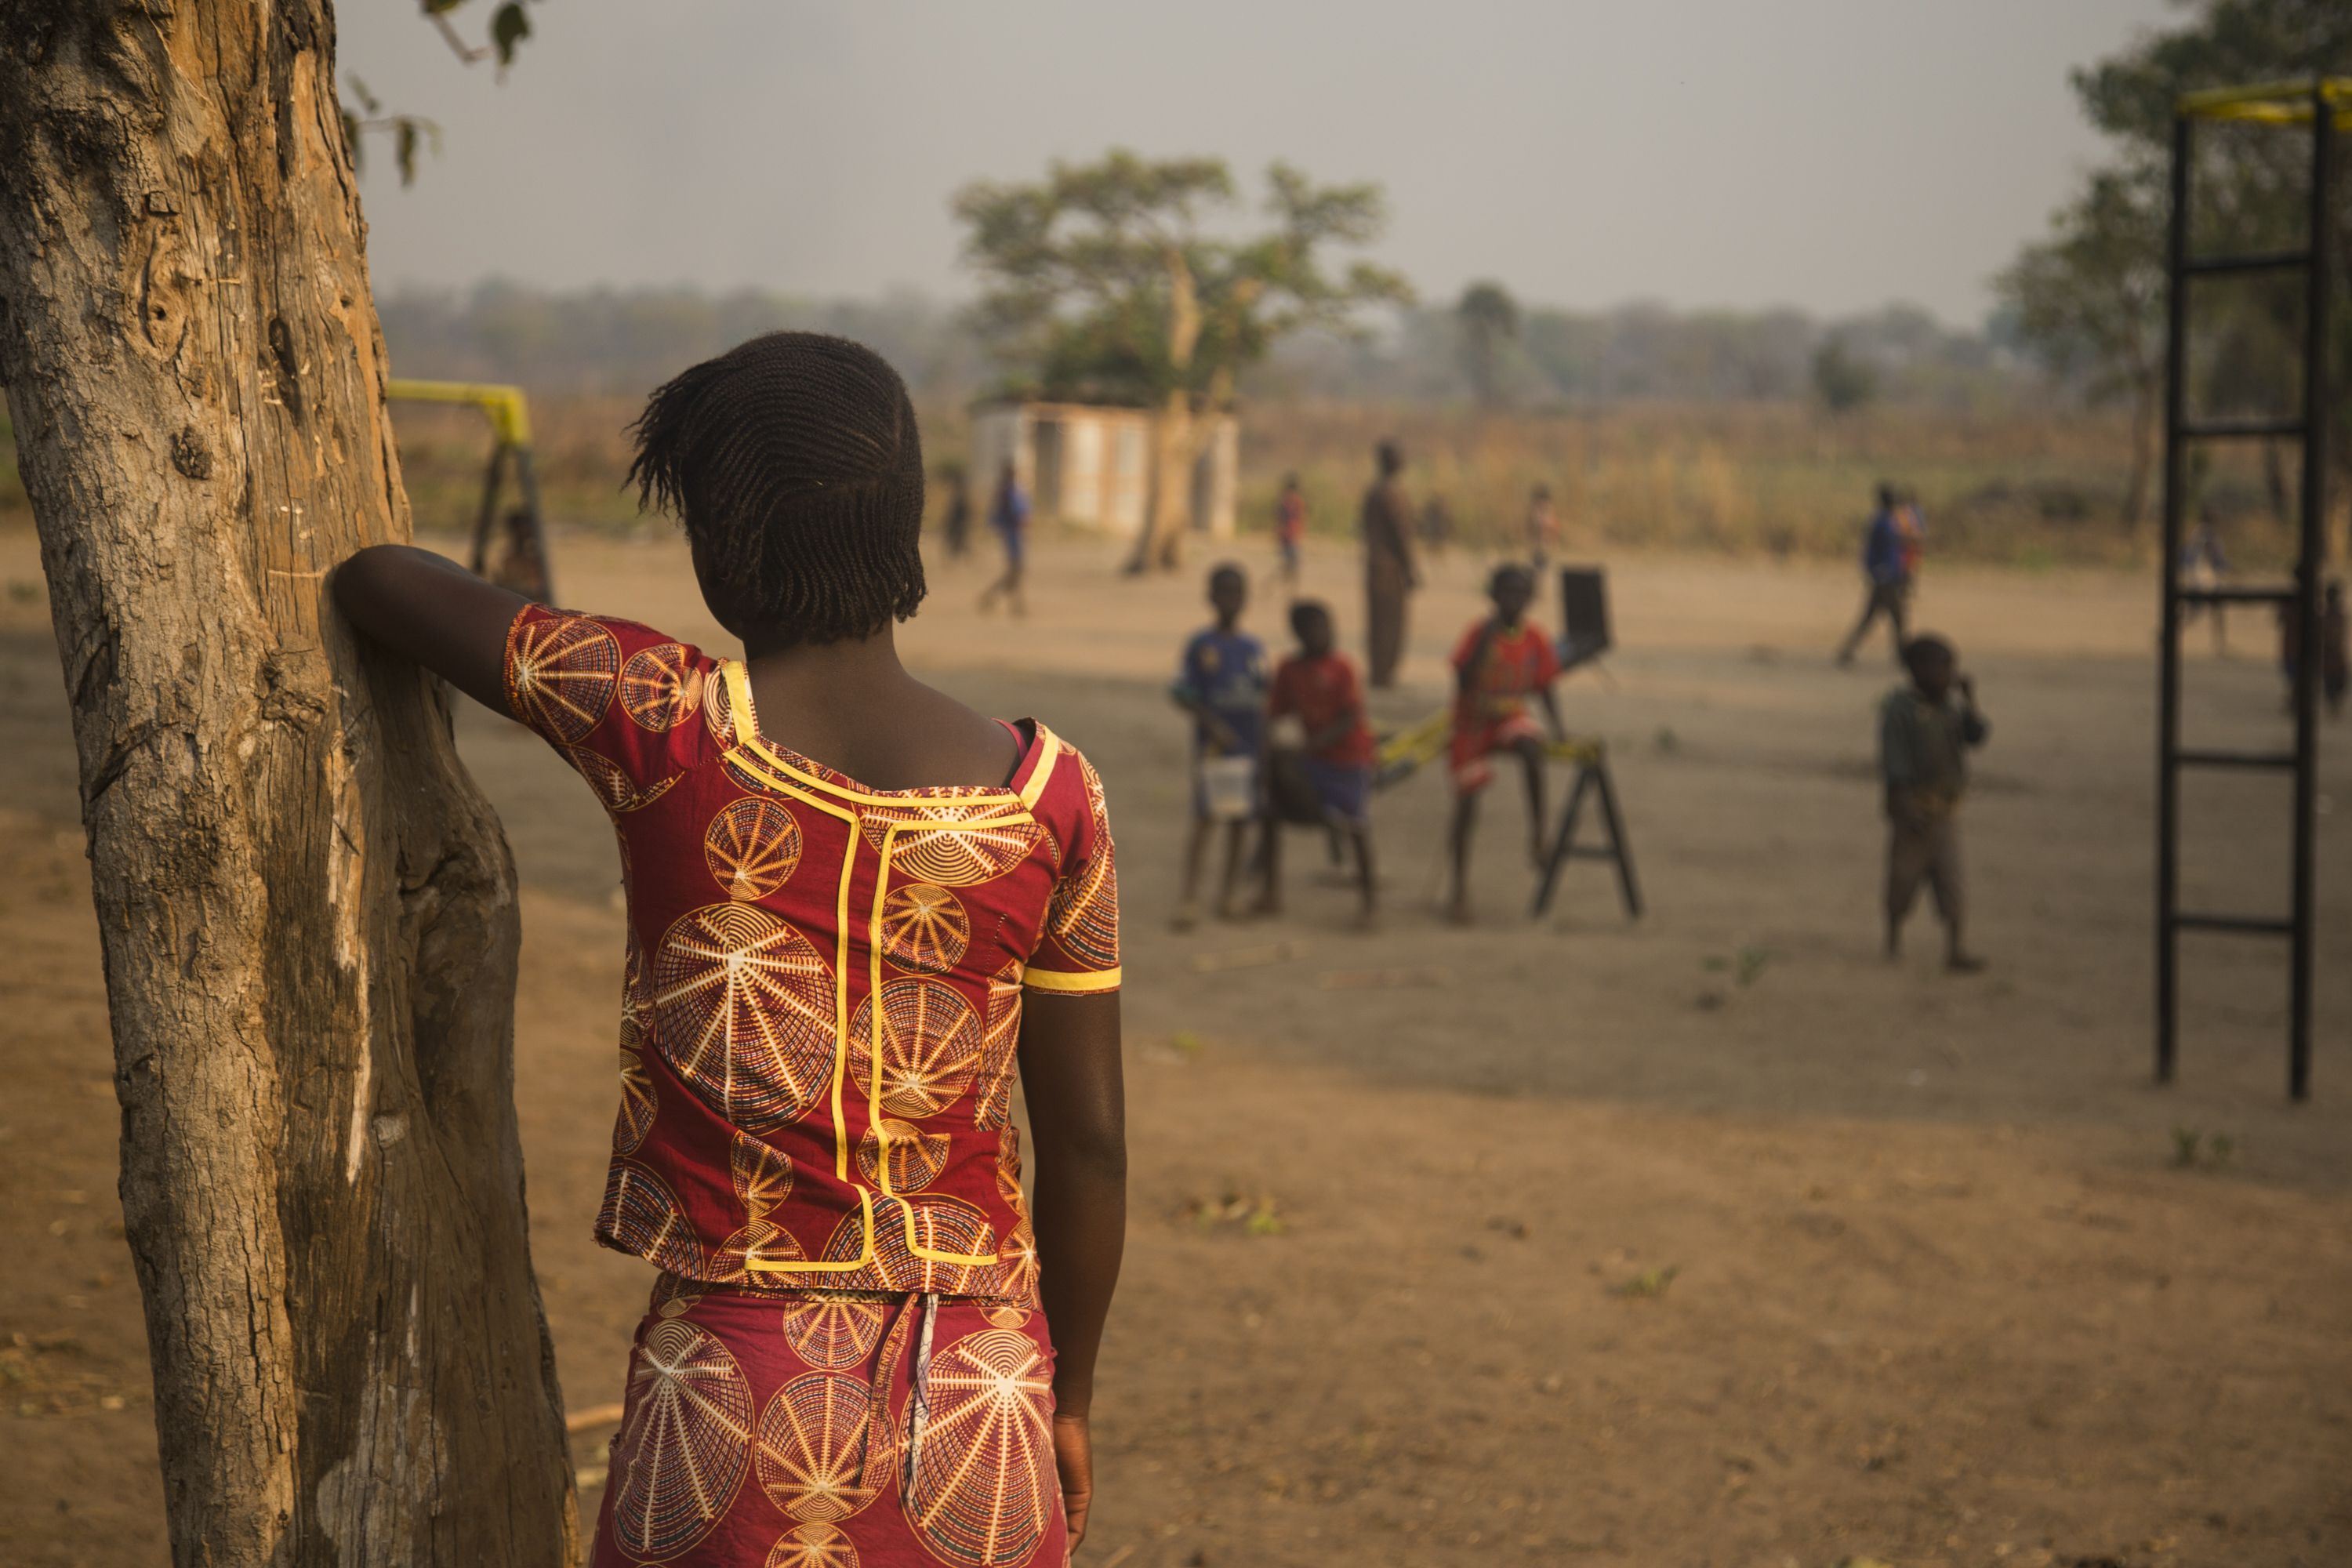 Rose, a teenage girl who was raped by militants, watches children play at a camp for displaced people. Image by Jack Losh. Central African Republic, 2018.